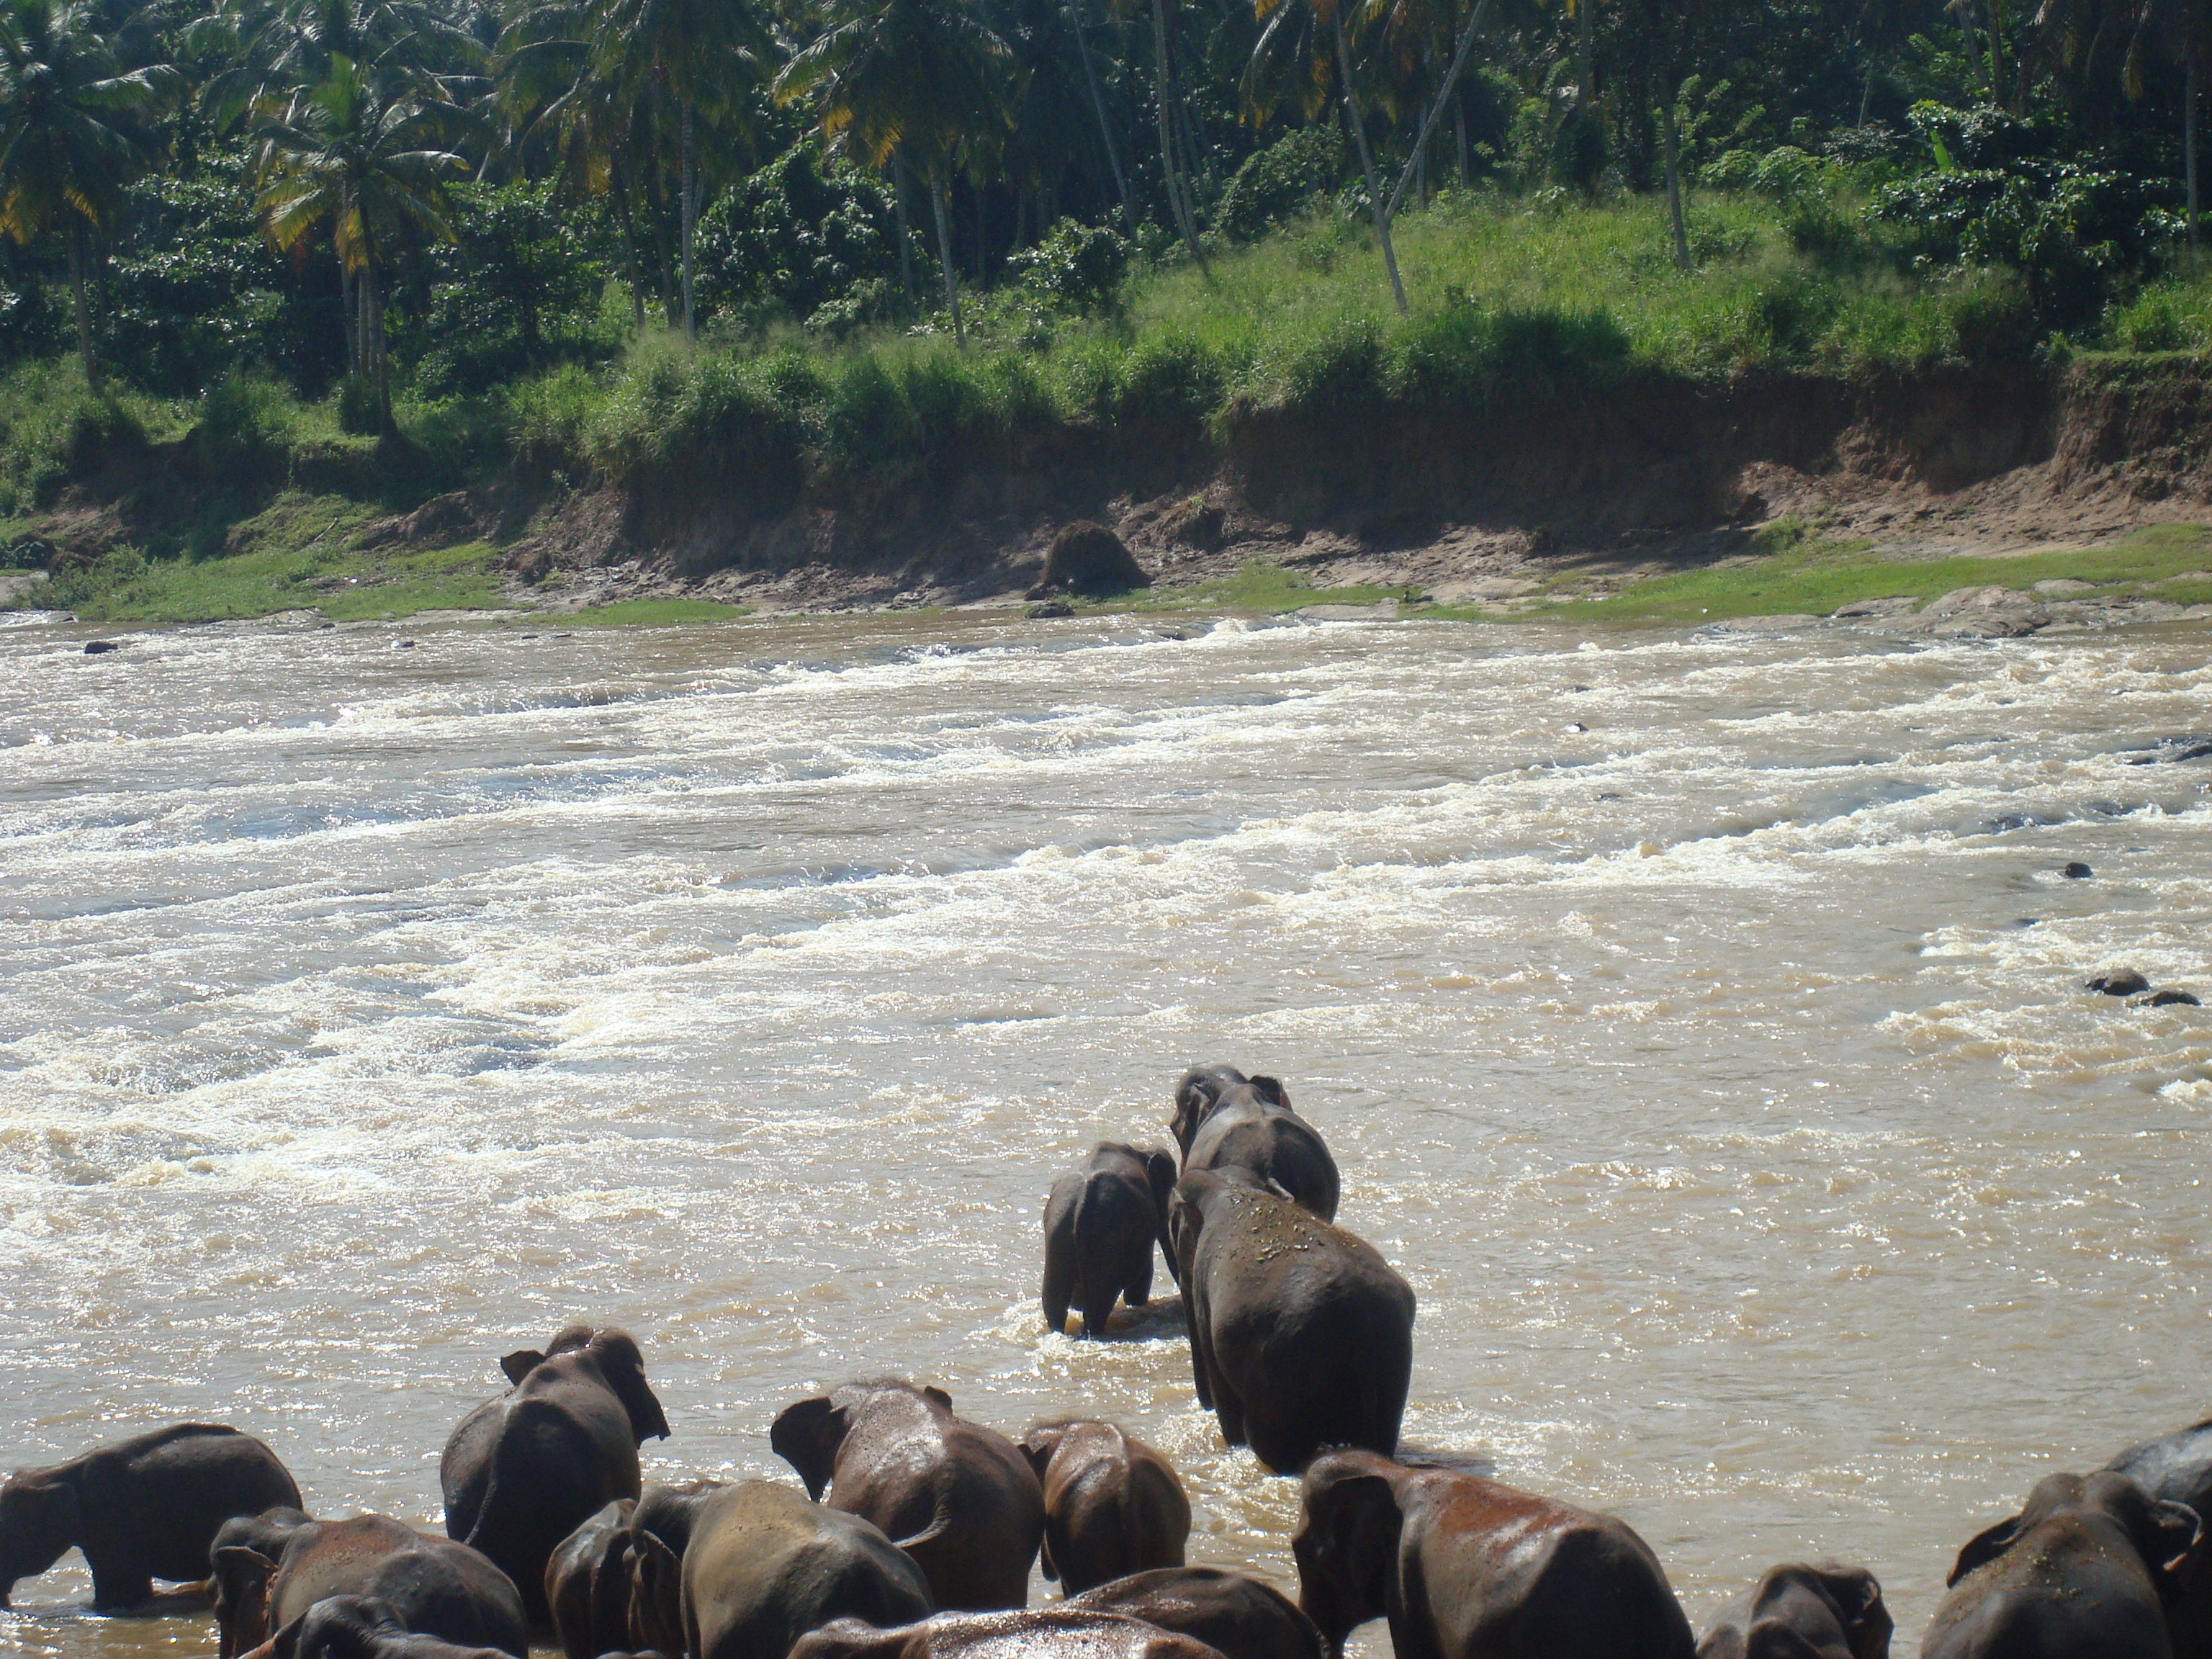 Elephants walking into the river for bathing